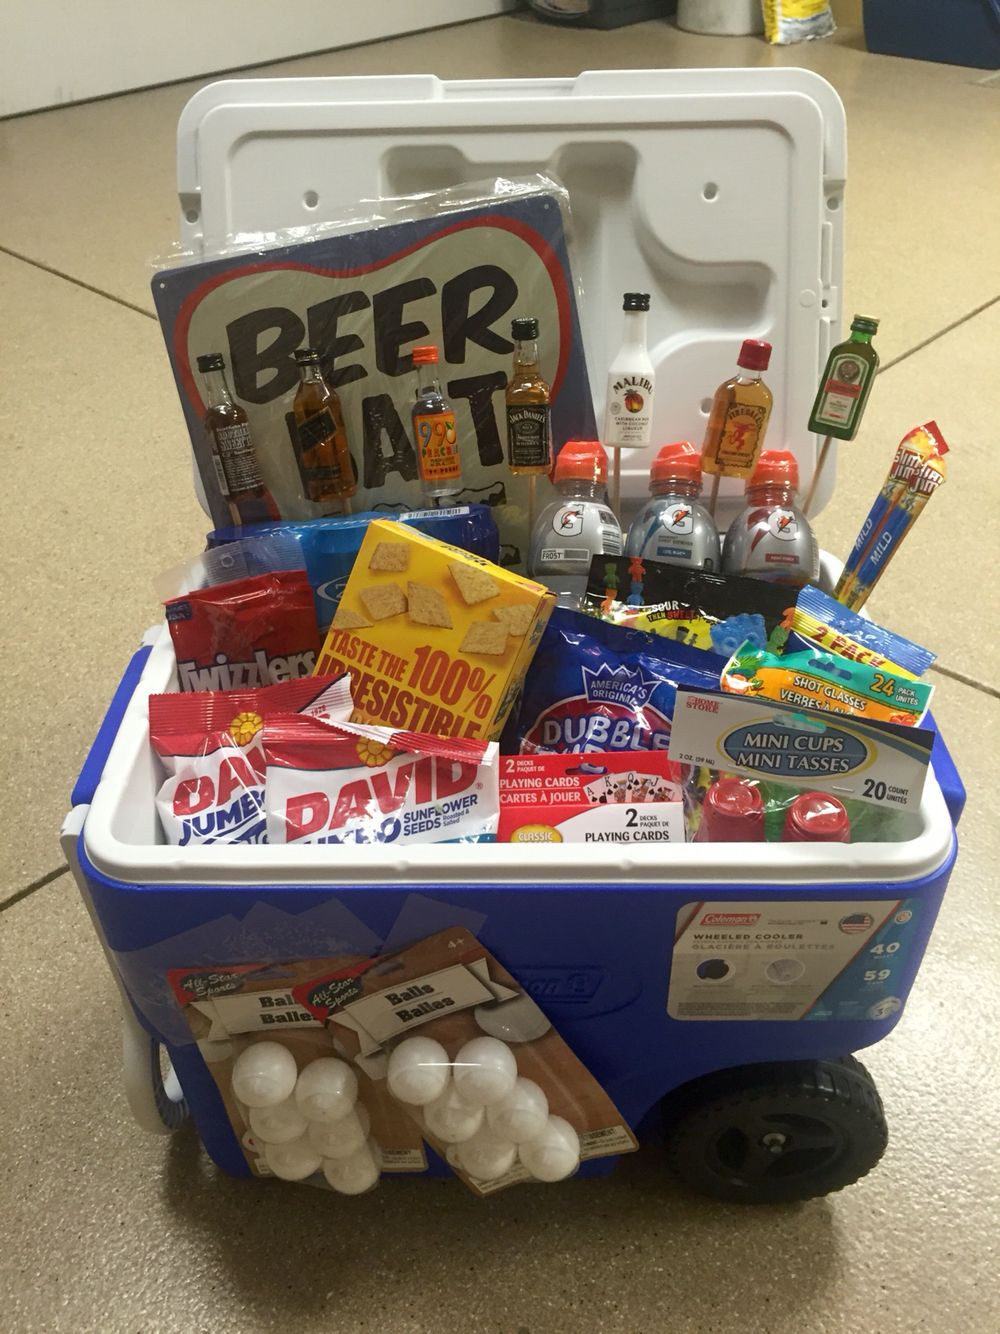 21St Birthday Gift Ideas For Guys
 Ice Chest Gift Basket 21st birthday for a guy